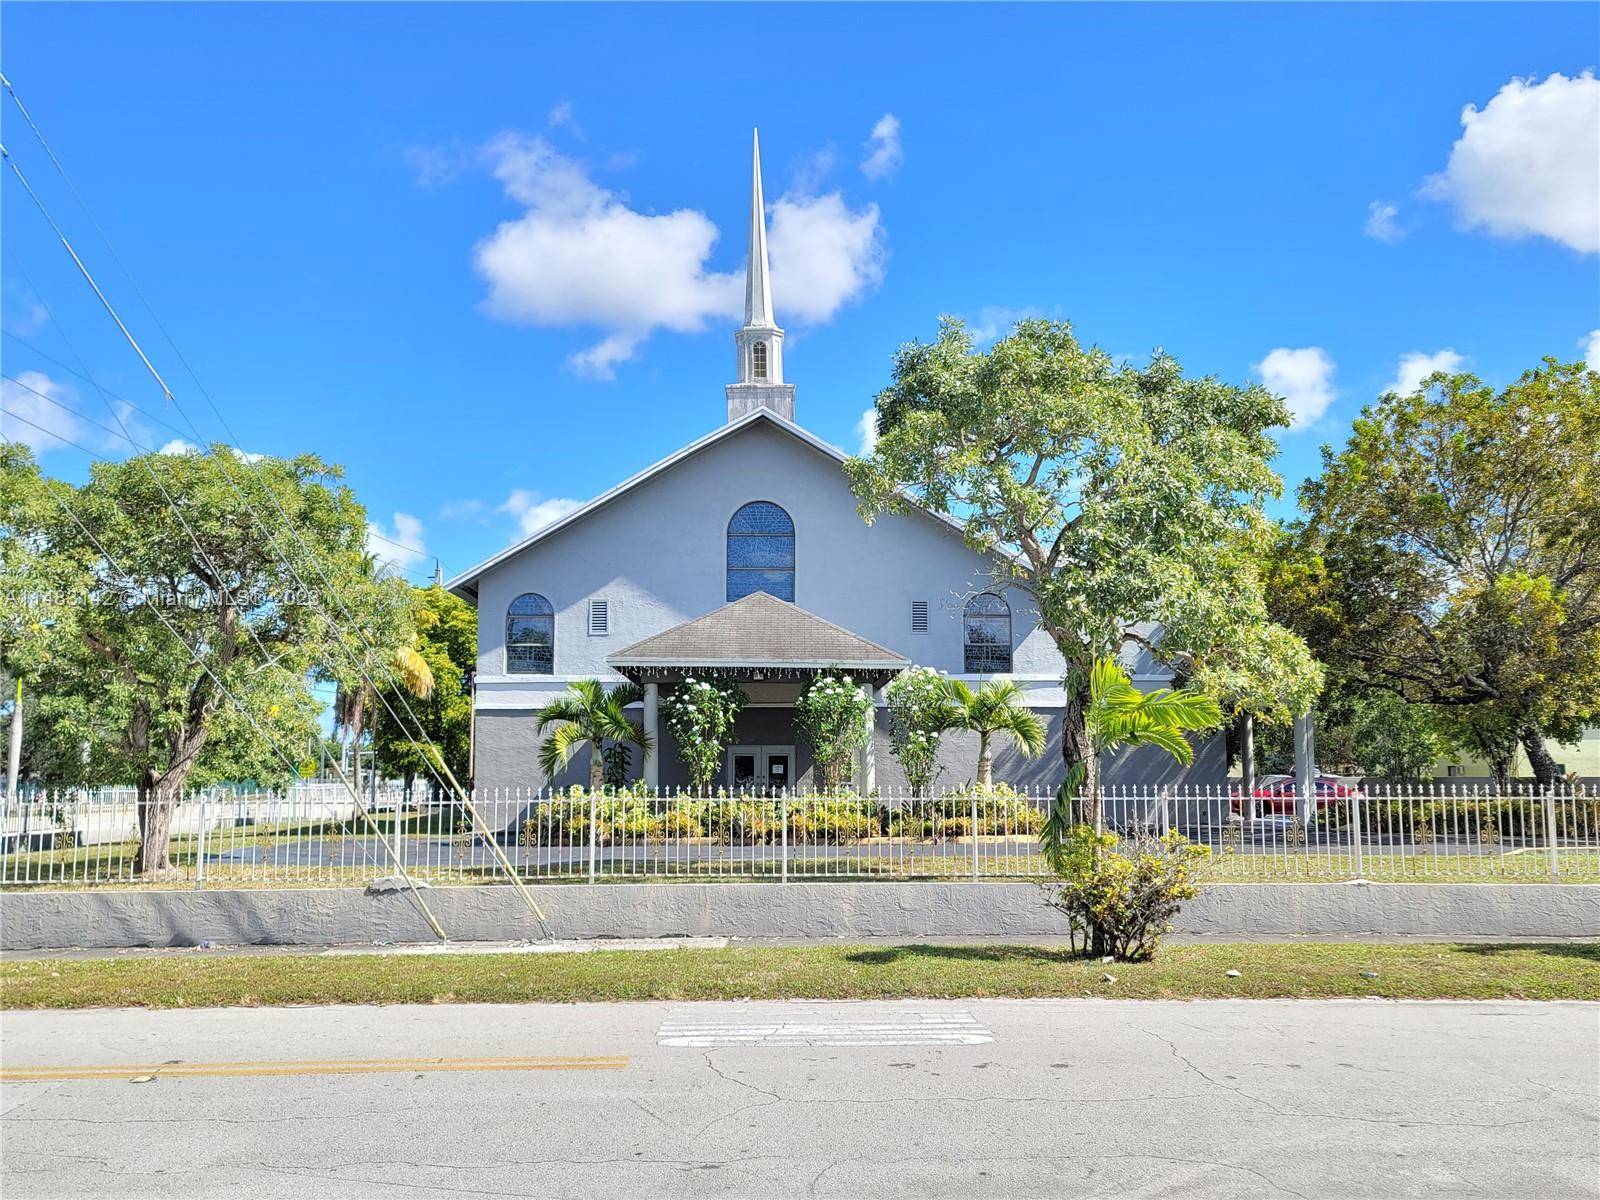 Beautiful Place of Worship centrally located in Miami Gardens.